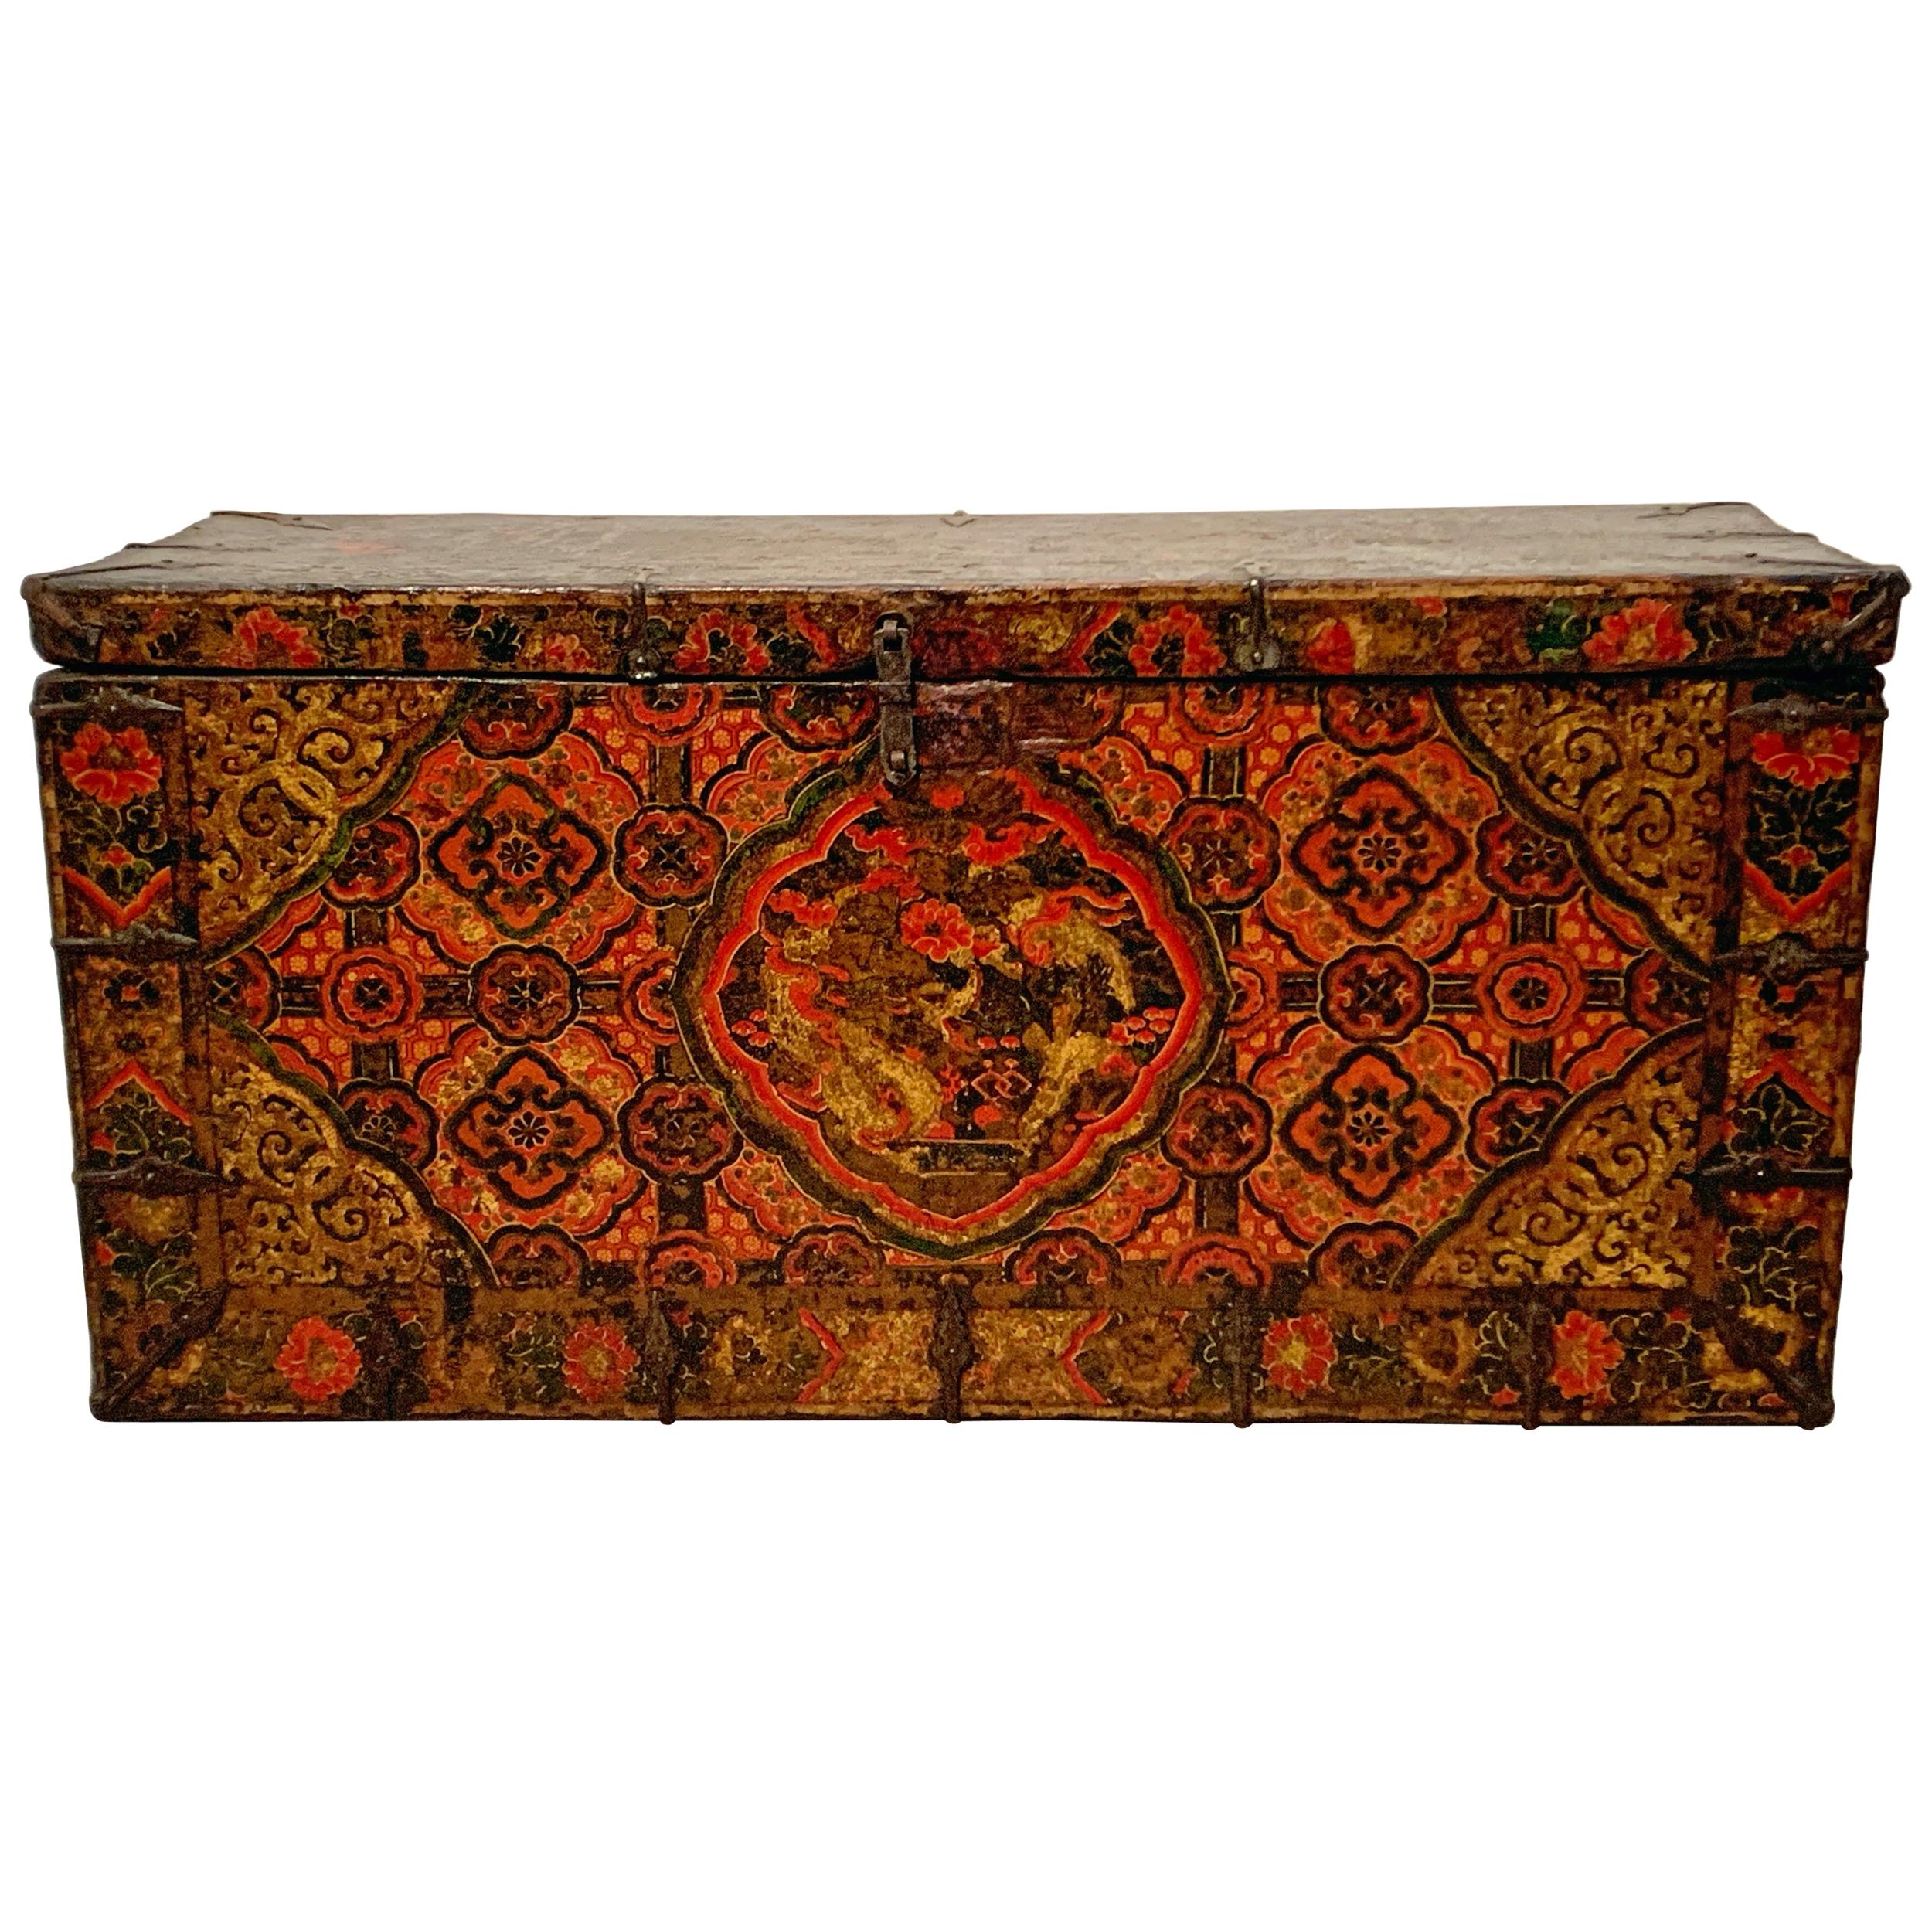 Tibetan Painted Trunk with Dragon and Brocade Design, 17th-18th Century, Tibet